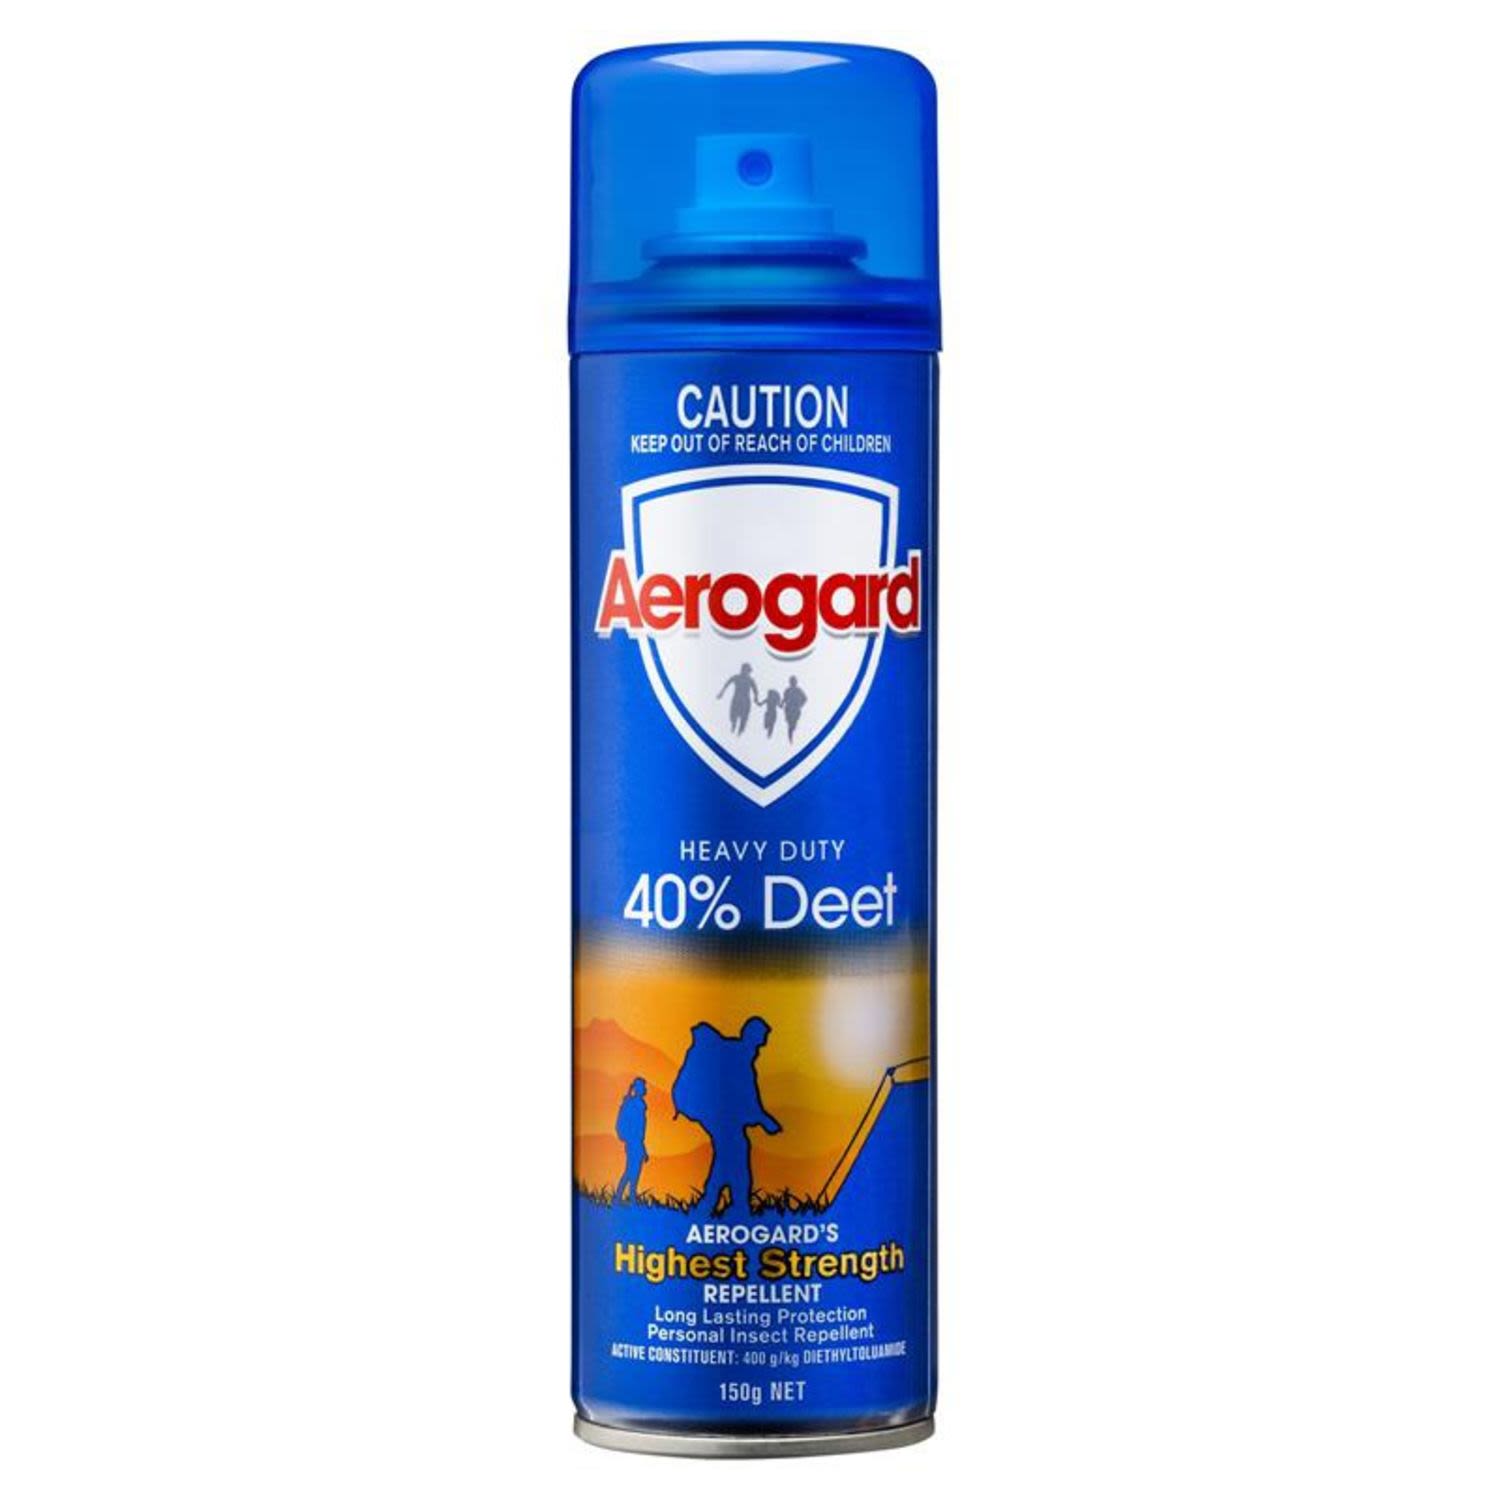 <p>Aerogard’s highest strength insect repellent with 40% Deet</p><p>- A heavy duty aerosol spray that is specifically formulated for long lasting protection in areas of intense insect activity</p><p>- Effective protection against mosquitoes, sandflies and leeches</p><p>- Also repels march flies, ticks and other biting insects</p><p>- Helps to protect you and your family against disease carrying insects including mosquitoes that may spread Ross River Fever and Dengue Fever</p><p>- Additional repellency can be gained by lightly spraying clothing</p><br /> <br /> <br /><br />Country of Origin: Made in Australia from imported and local ingredients